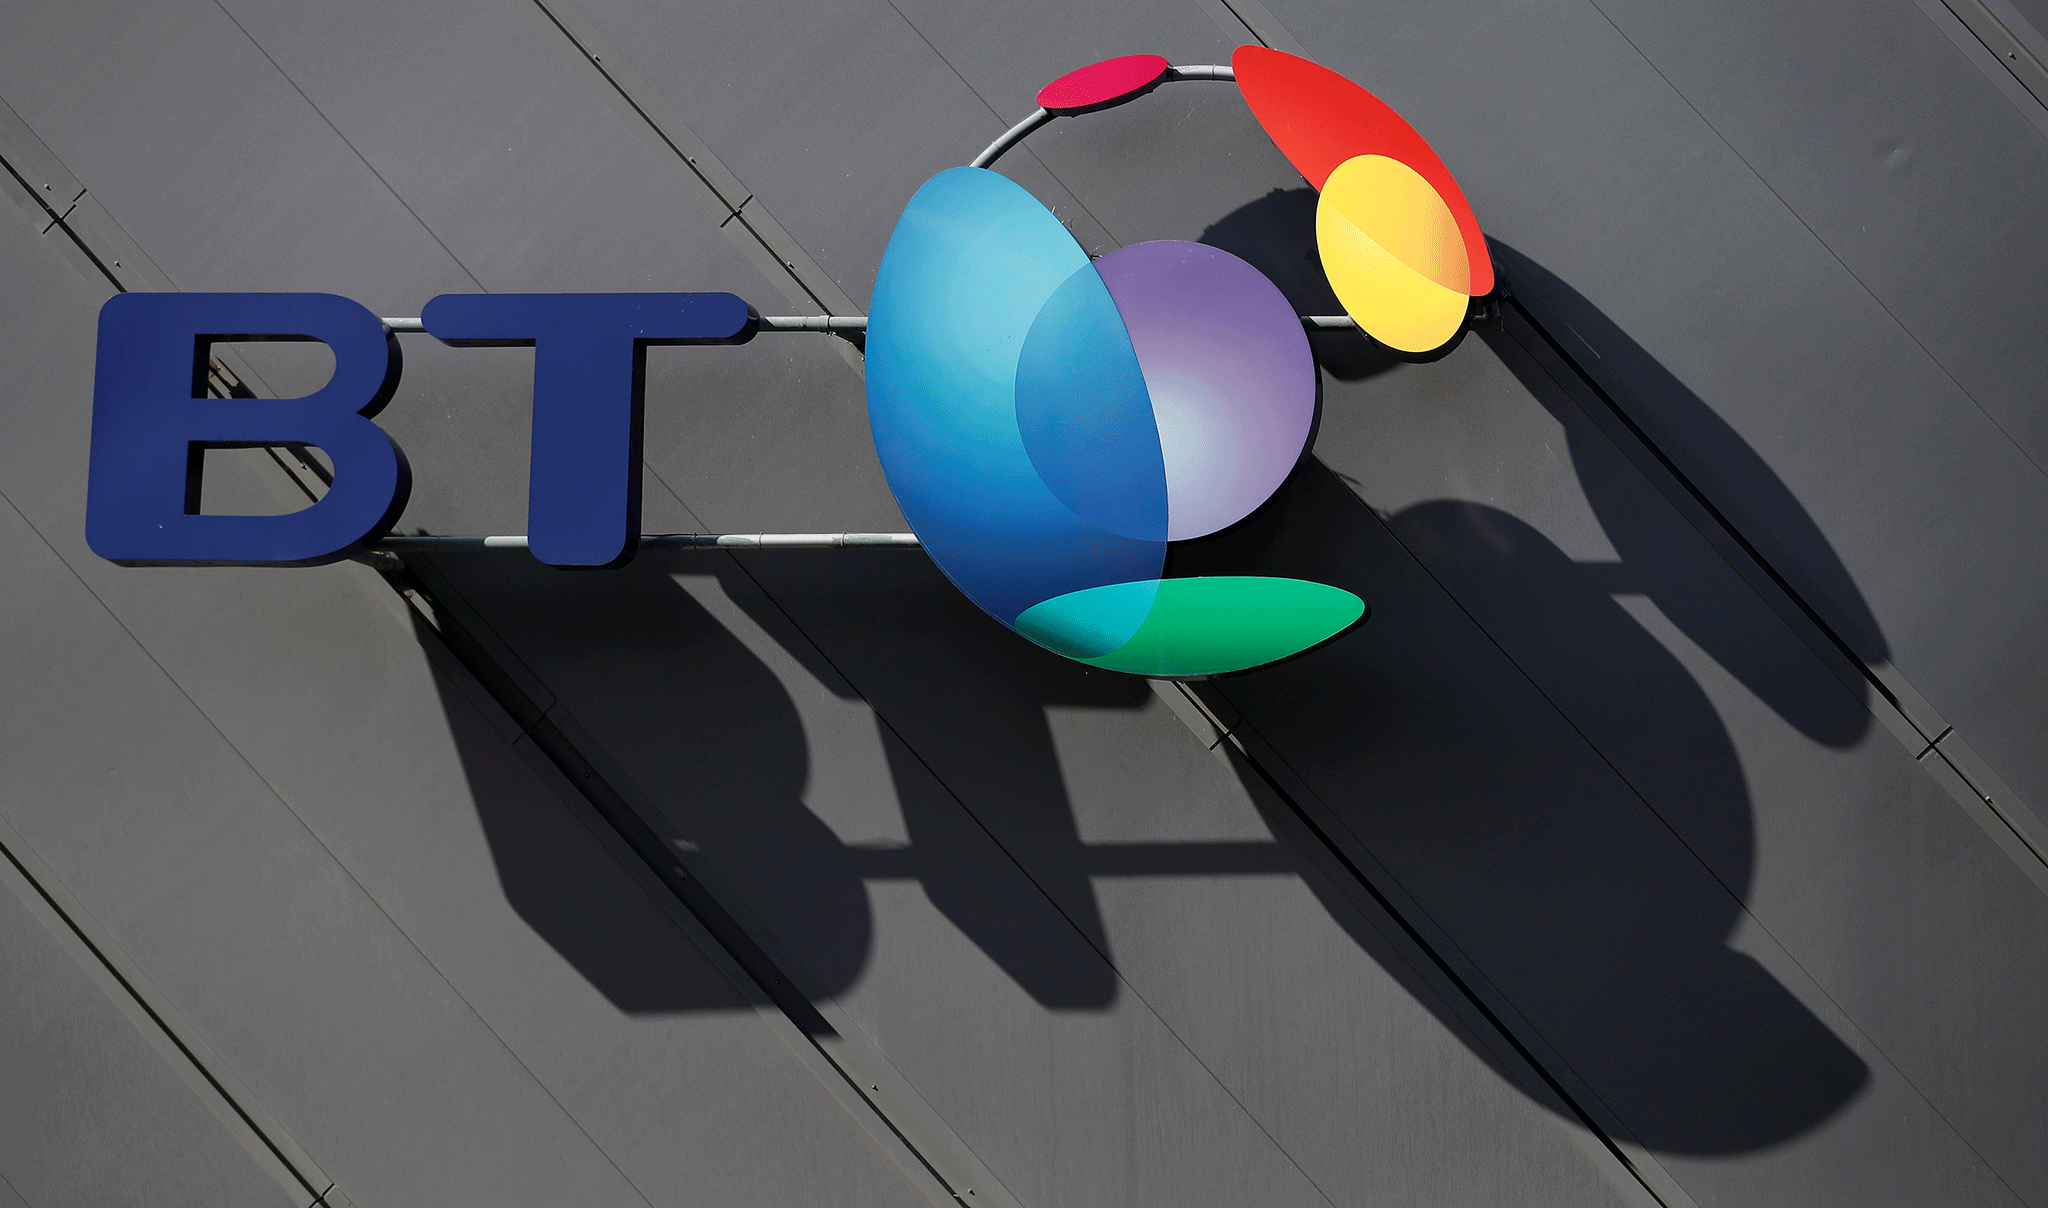 BT is promising ‘a shot in the arm for the UK’